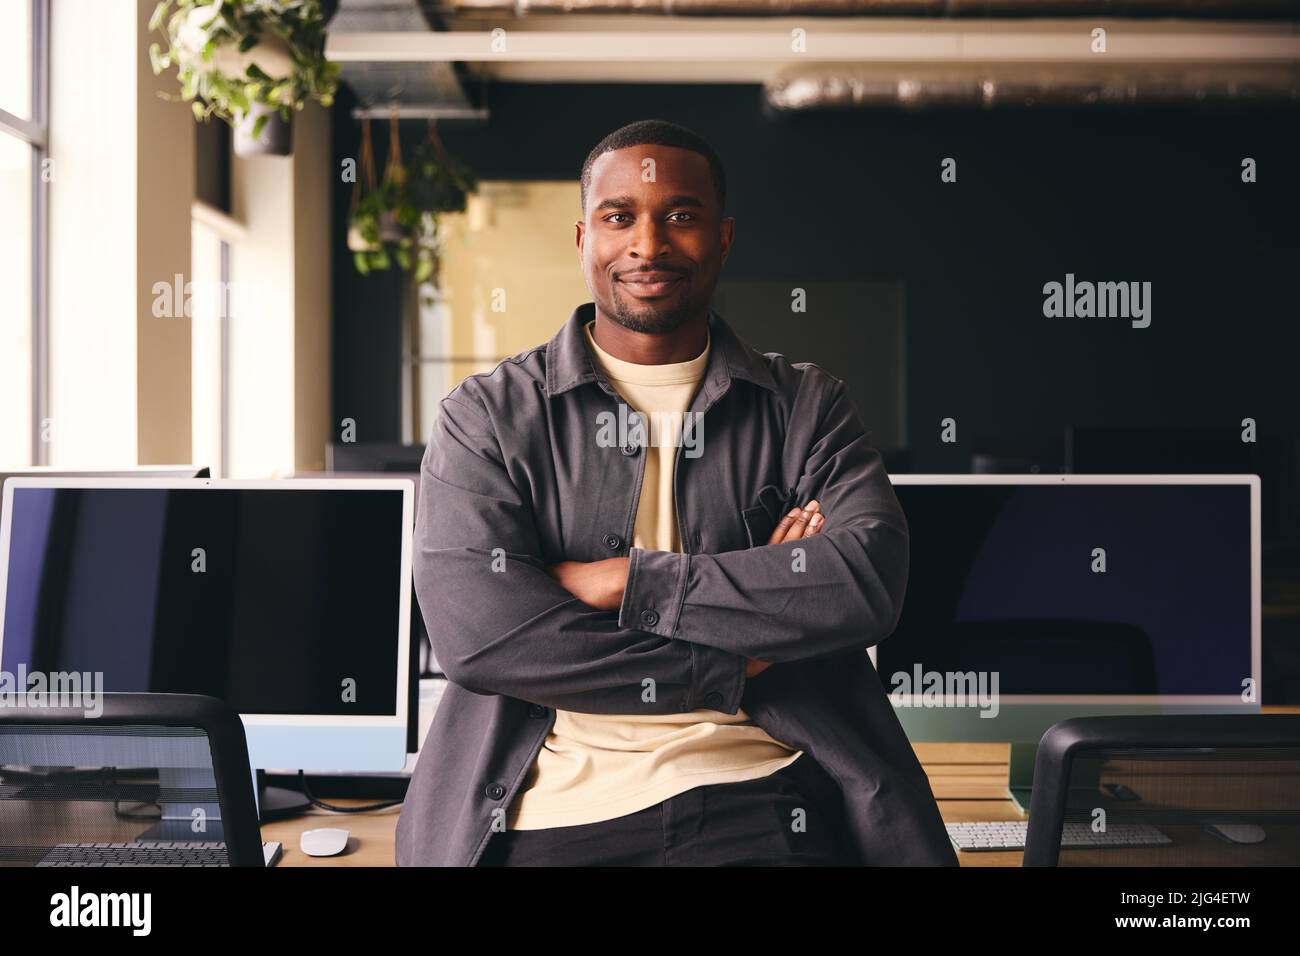 Smiling Young Black Male Standing In Office Looking At Camera With Arms Crossed Stock Photo